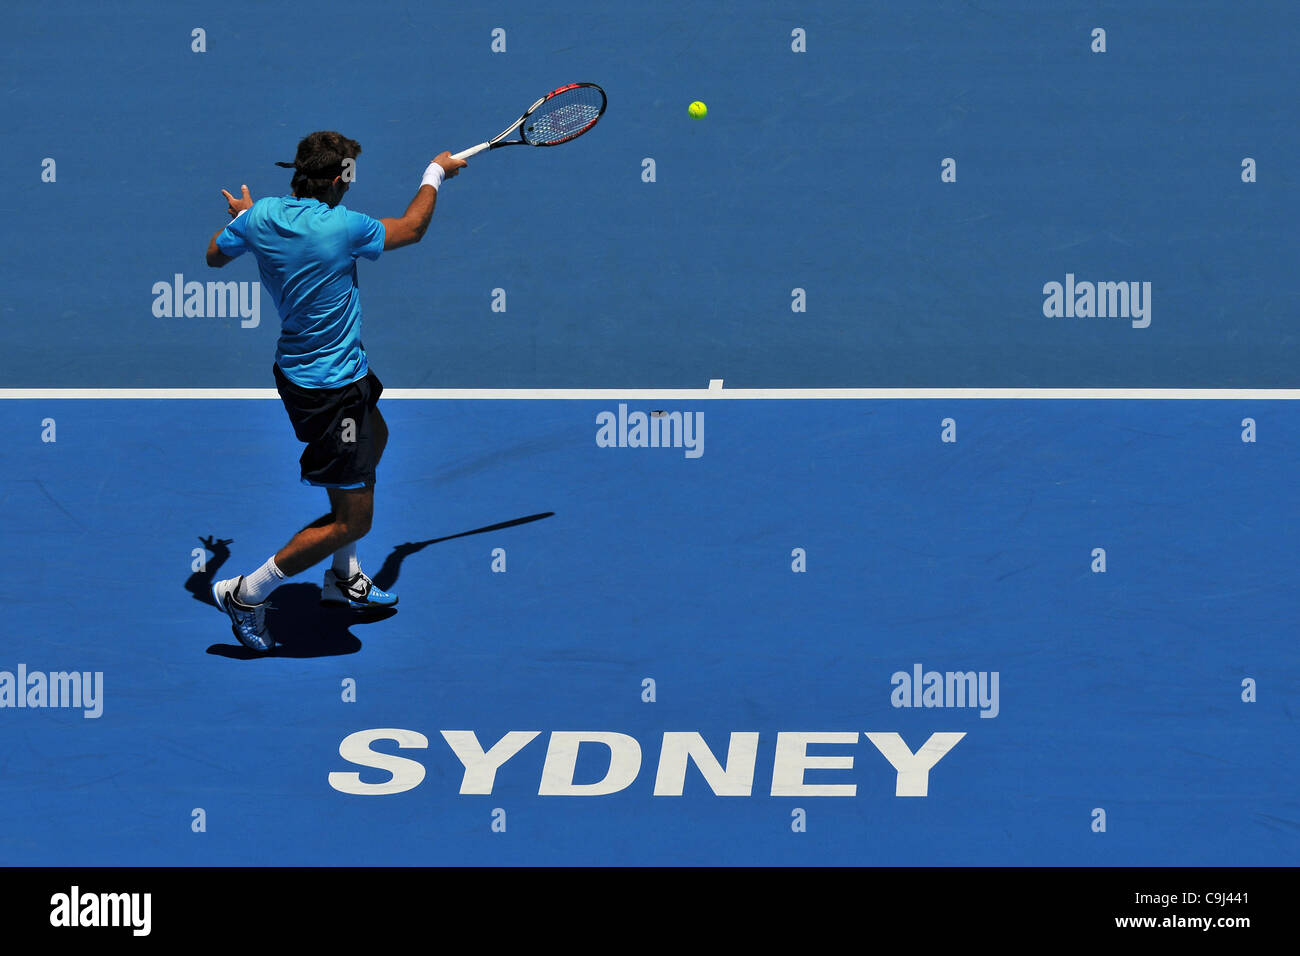 11.01.12 Sydney, Australia.2009 US Open champion and former world No. 4 Argentine Juan Martin Del Potro  in action during the Apia International Sydney Tennis Tournament , Australian Open Series, at the Sydney Olympic Park Tennis Centre,Homebush. Stock Photo